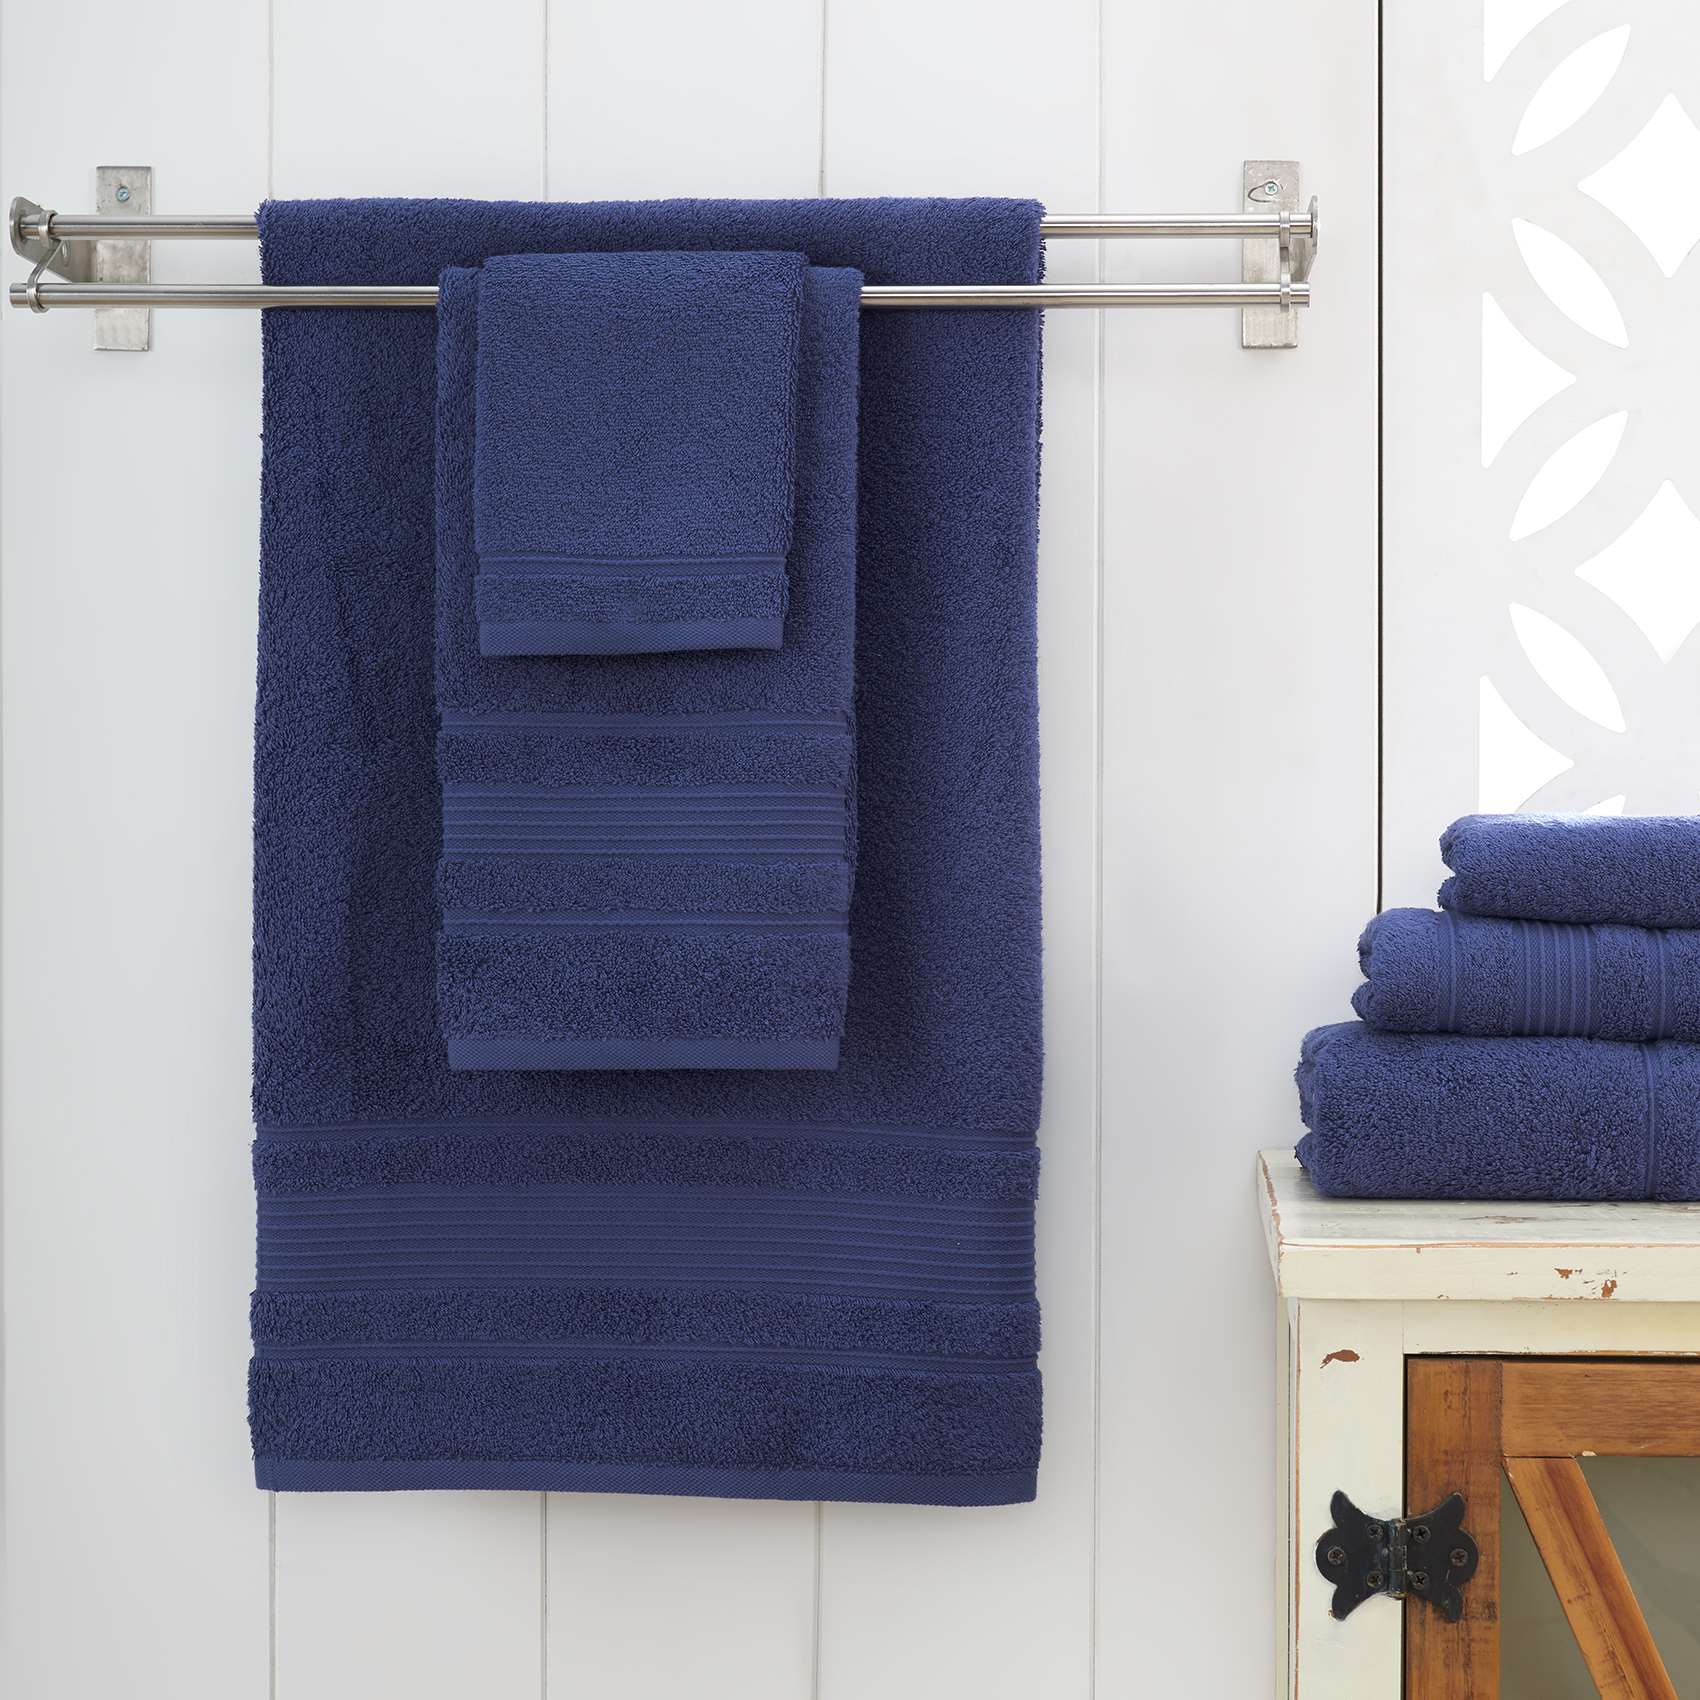 Qute Home Spa & Hotel Towels 8 Piece Towel Set, 2 Bath Towels, 2 Hand Towels, and 4 Washcloths - Navy Blue - image 3 of 3